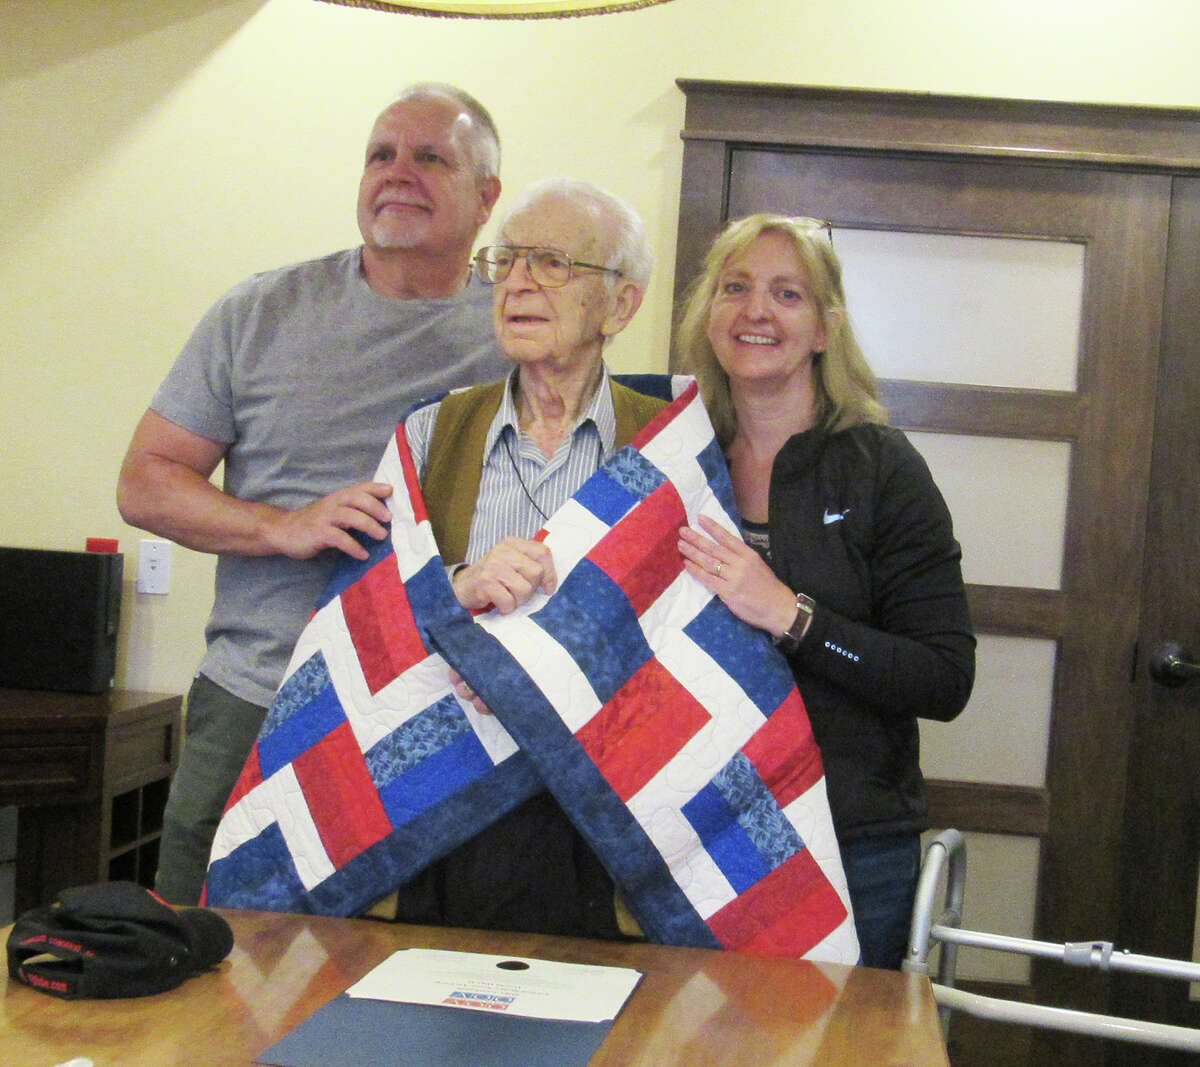 Mike Lombardi, middle, a 100-year-old World War II veteran who is a resident at Stillwater Senior Living in Edwardsville, is flanked by his son, James Lombardi, and his daughter, Michele Grieve, as he receives a quilt from Quilts of Valor.